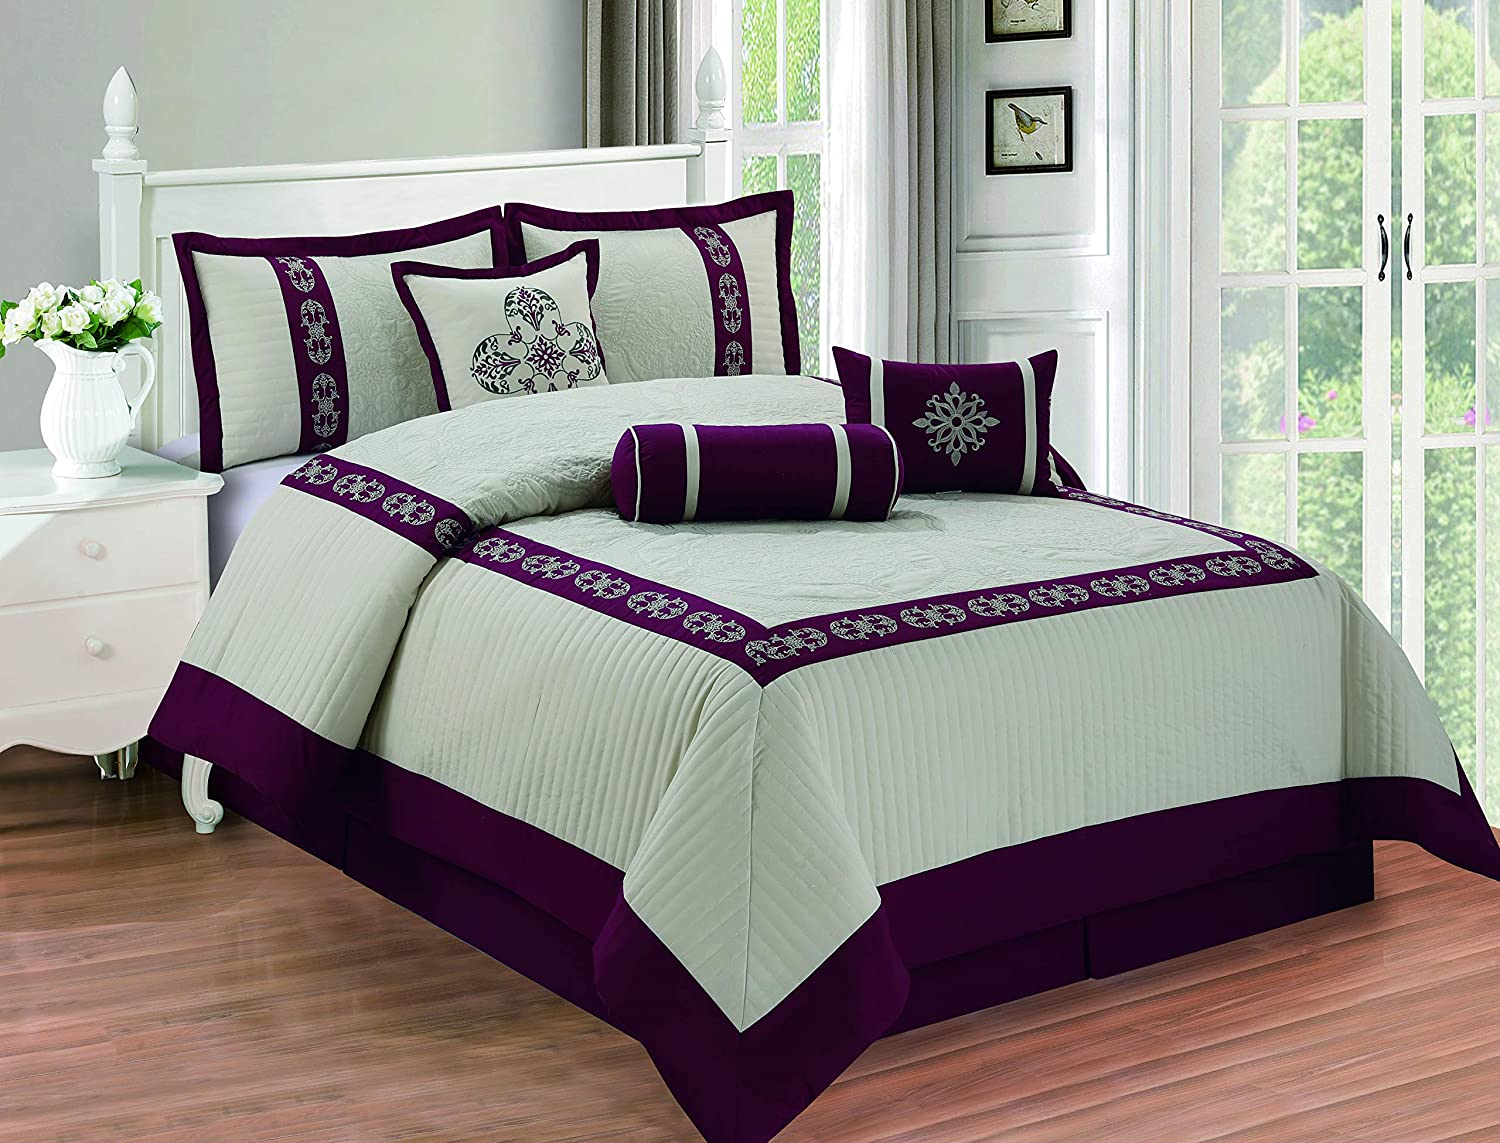 Queen, Purple/Grey All American Collection New 7 Piece Embroidered Over-Sized Comforter Set